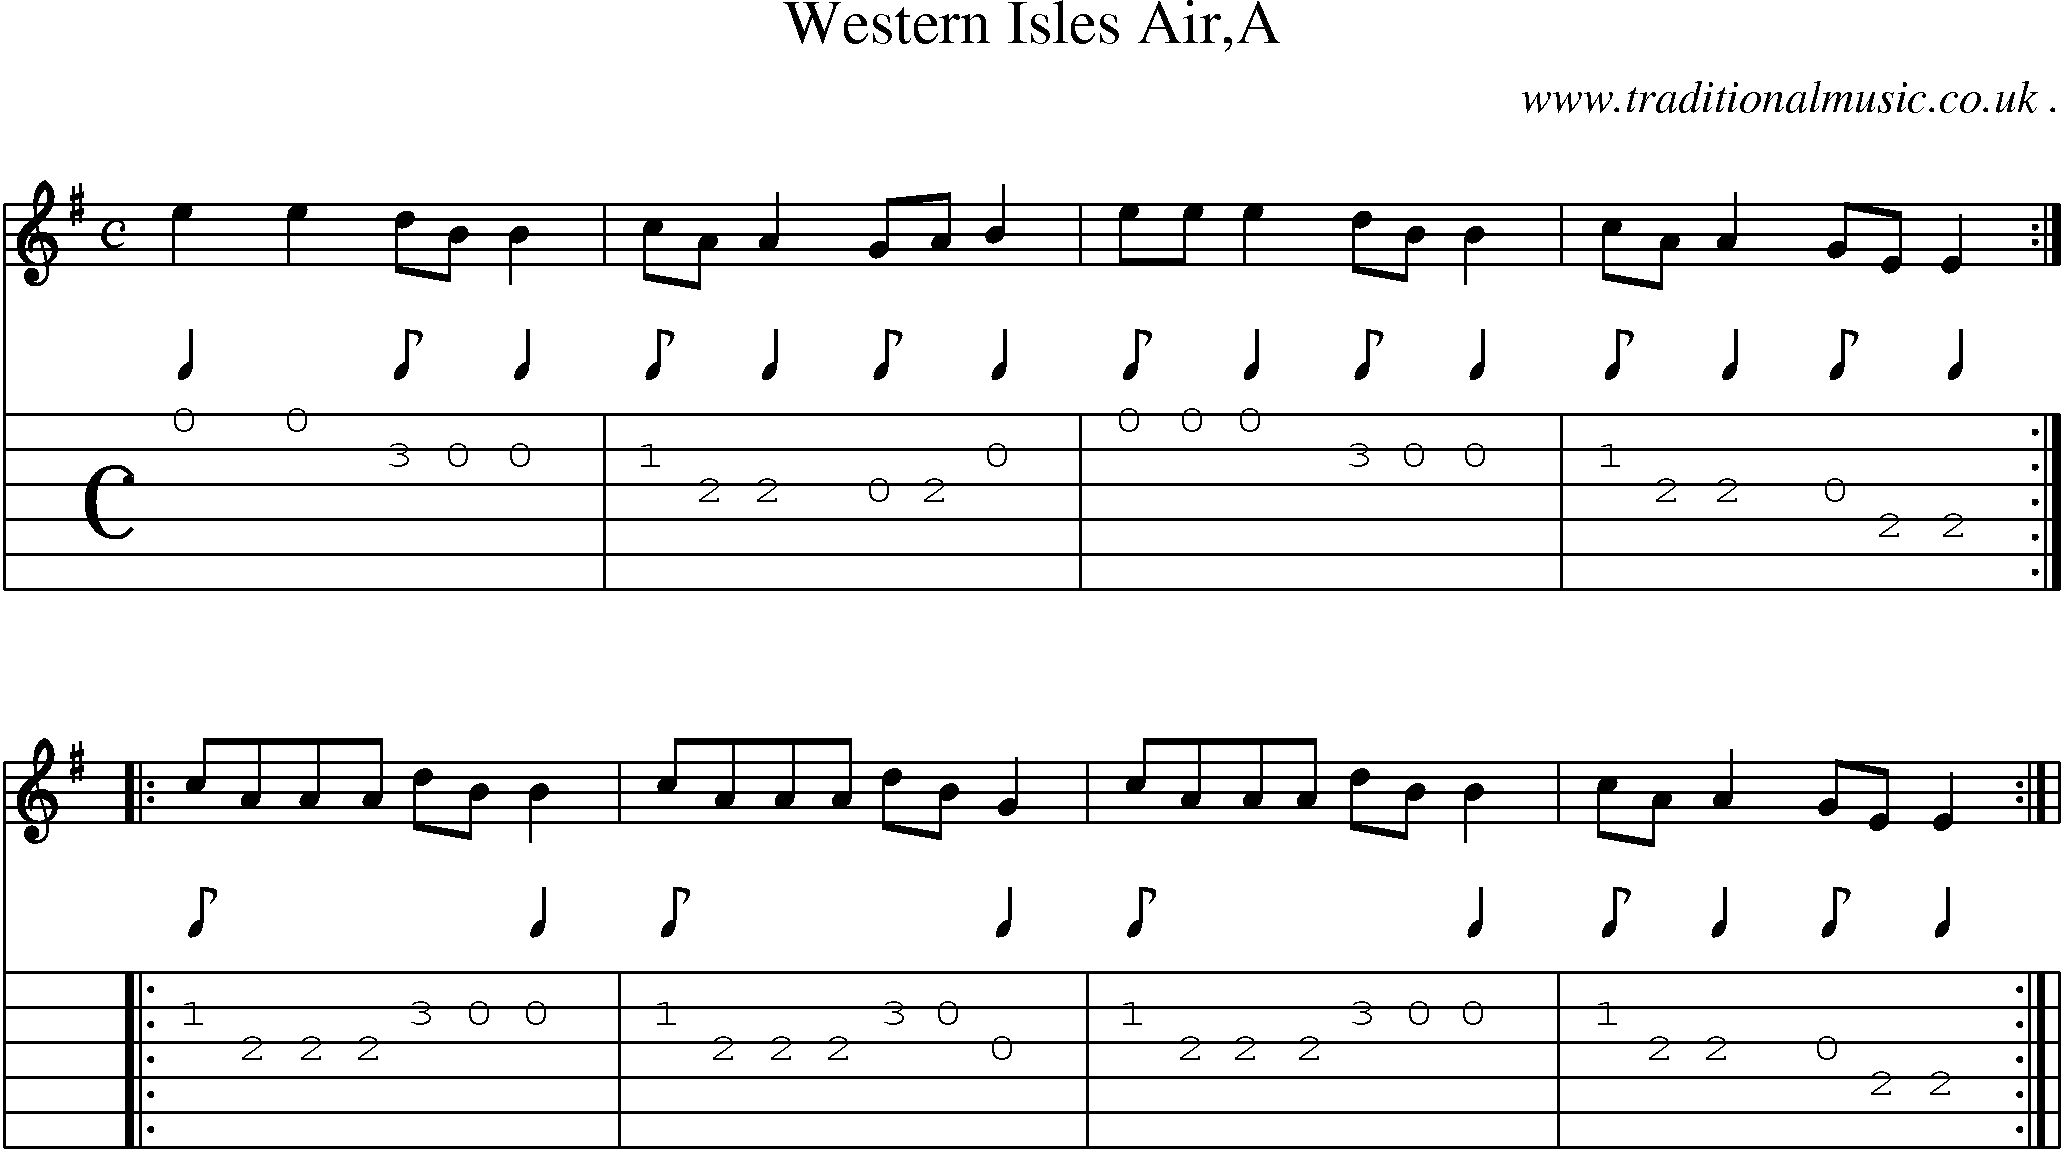 Sheet-Music and Guitar Tabs for Western Isles Aira